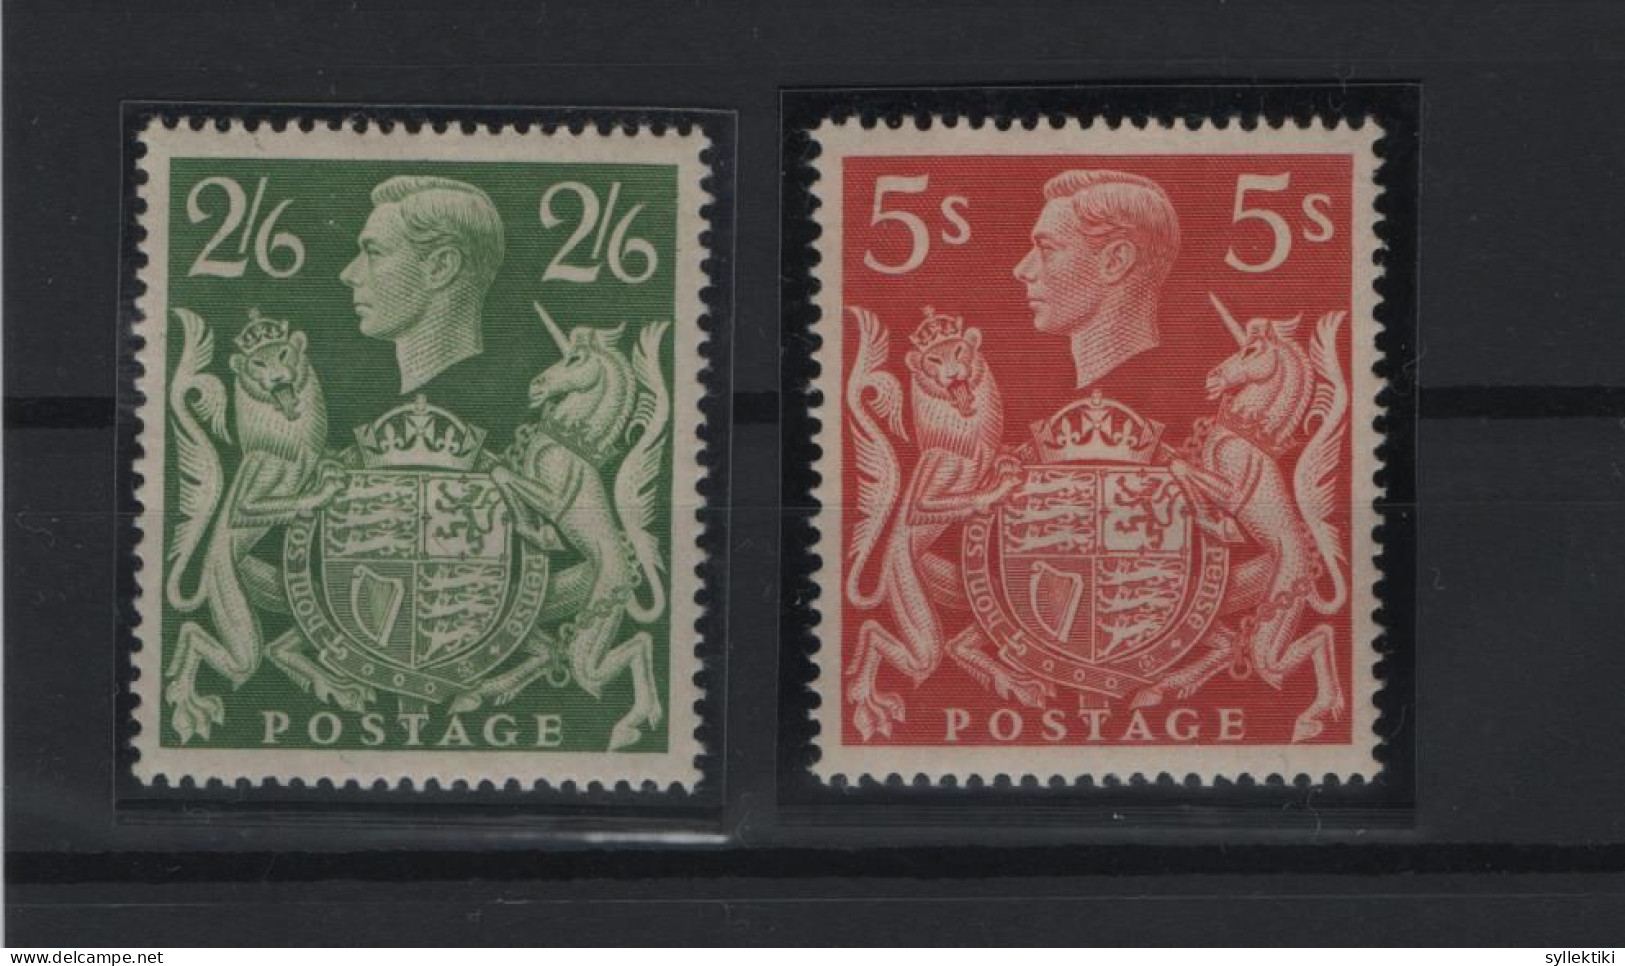 GREAT BRITAIN 1939 KGVI 2/6 & 5 SHILLINGS 2 DIFFERENT MNH STAMPS  STANLEY GIBBONS N 476b, 477  AND VALUE GBP 35.00 - Ungebraucht